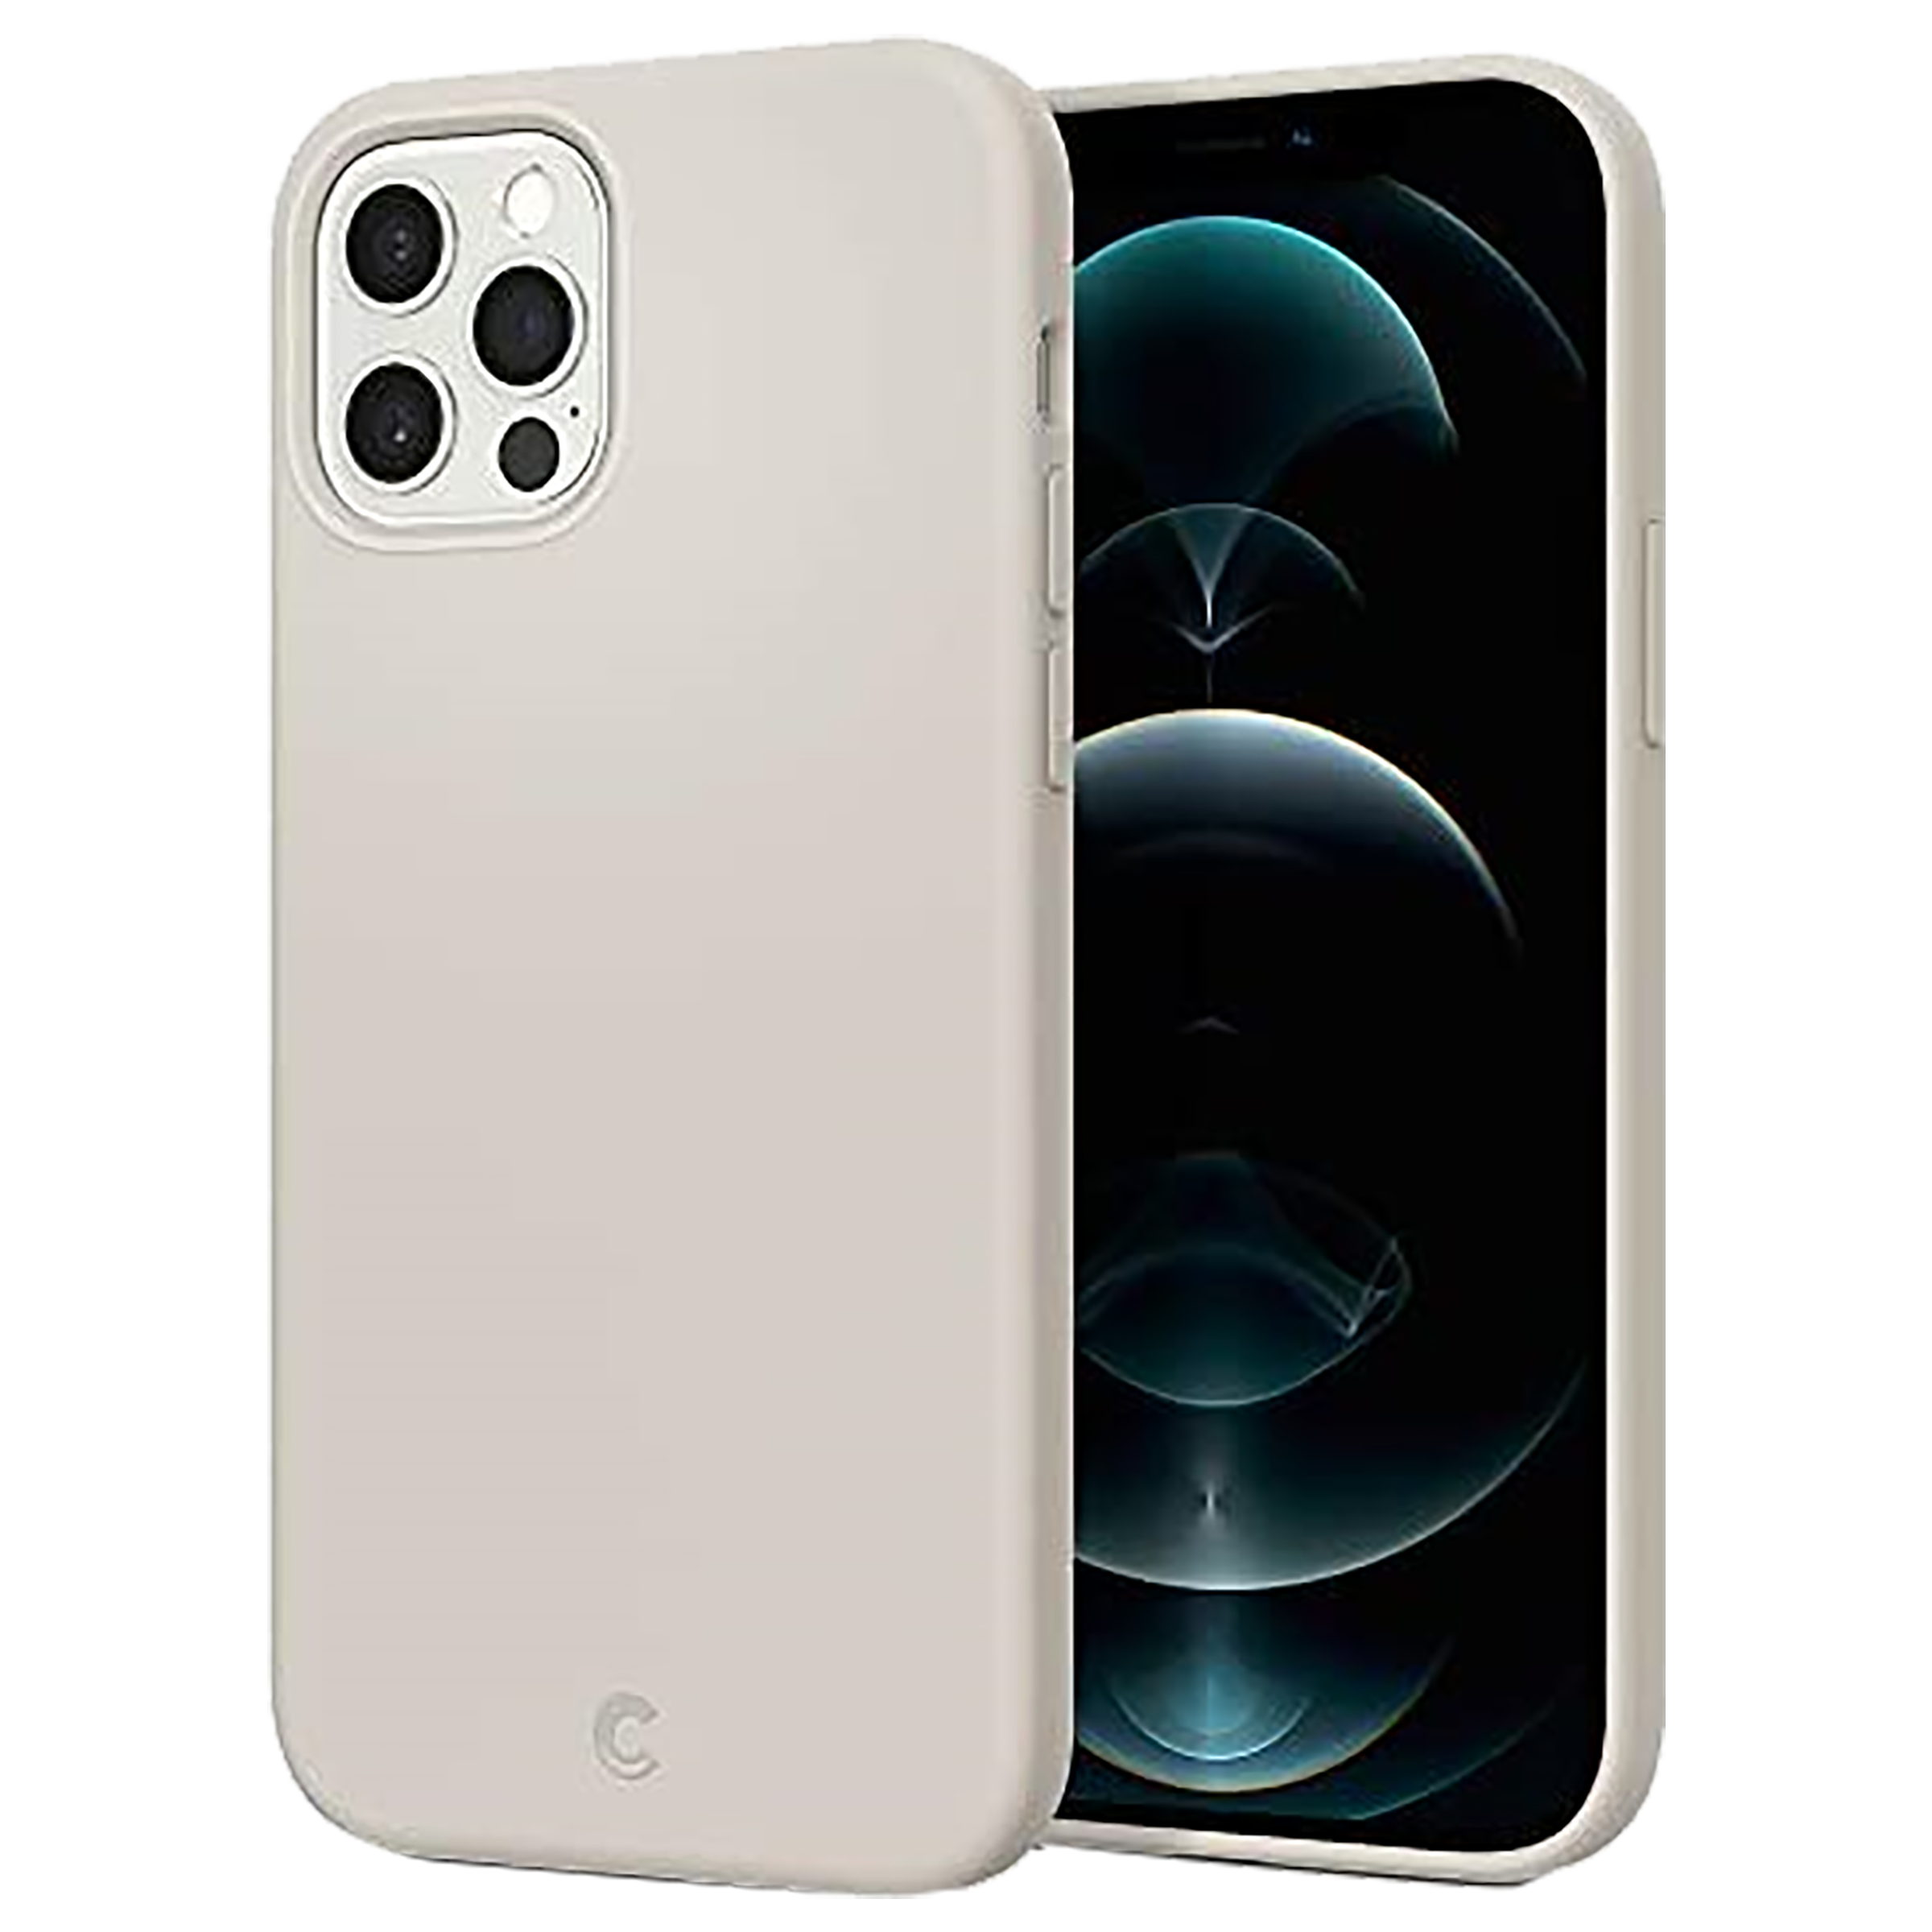 Buy Spigen Soft Silicone Back Cover For Apple Iphone 12 12 Pro